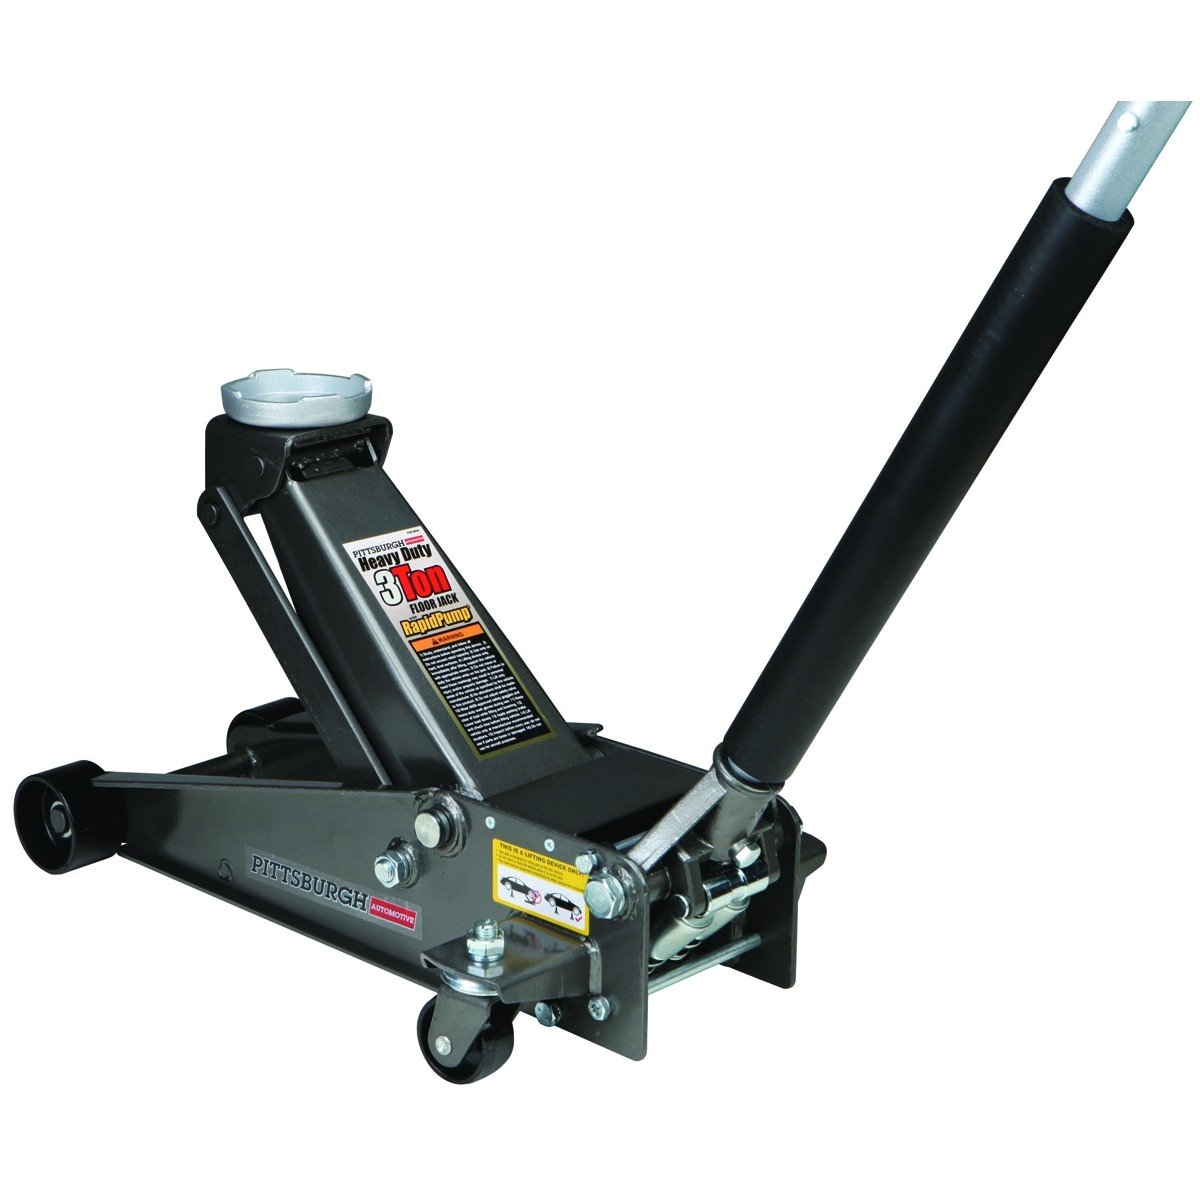 3 ton steel heavy duty floor jack with rapid pump by usatnm product image